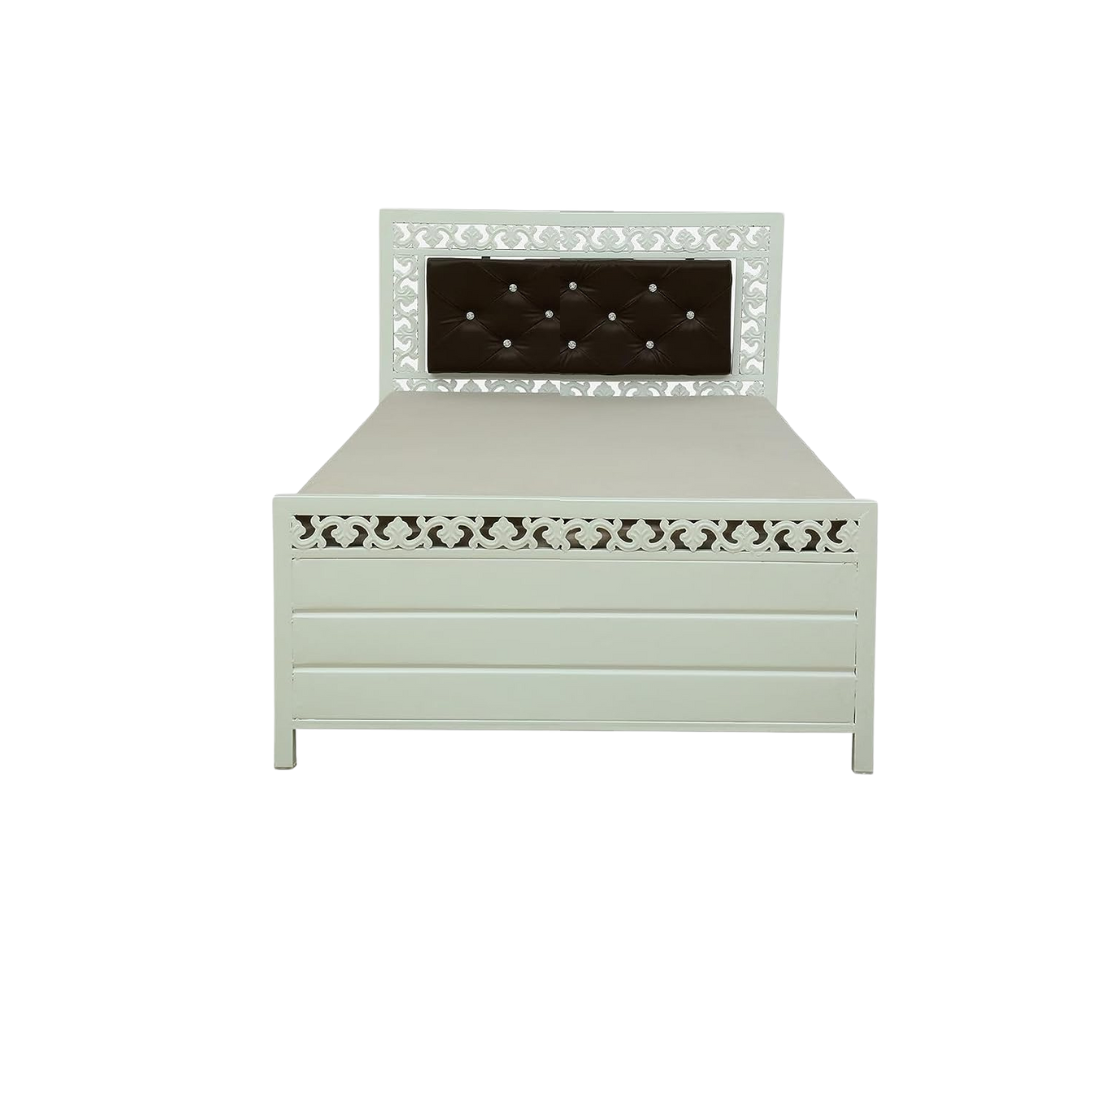 Cuba Hydraulic Storage Single Metal Bed with Brown Cushion Headrest (Color - White)